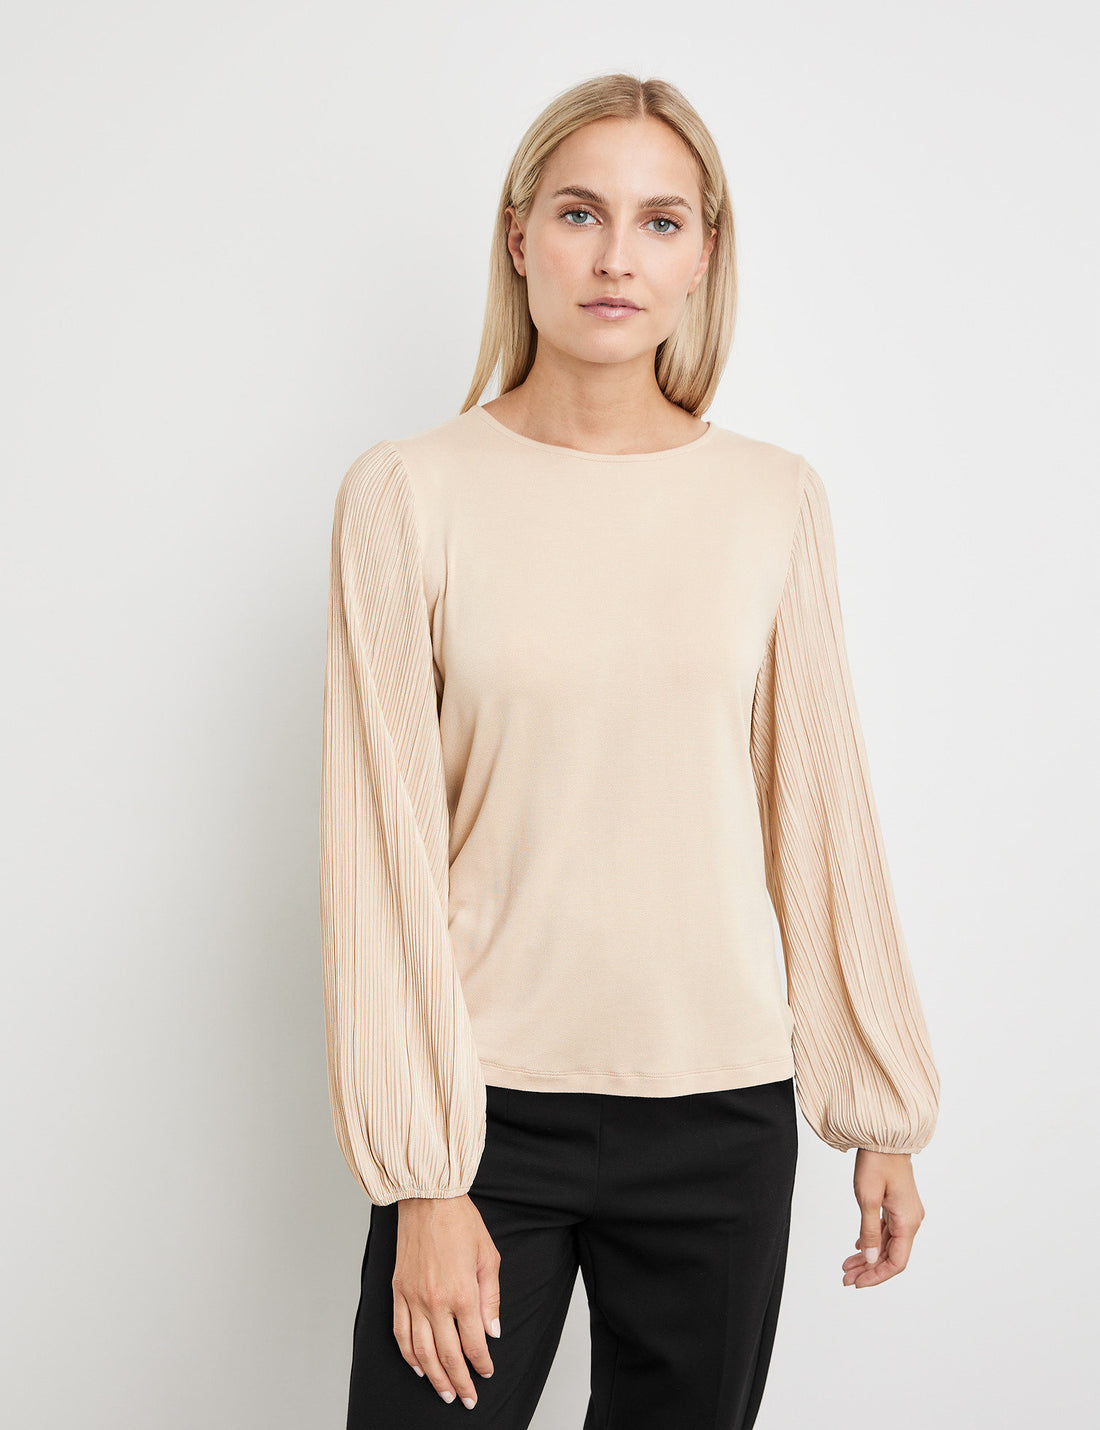 Blouse Top With Pleated Sleeves_471417-16319_9480_01